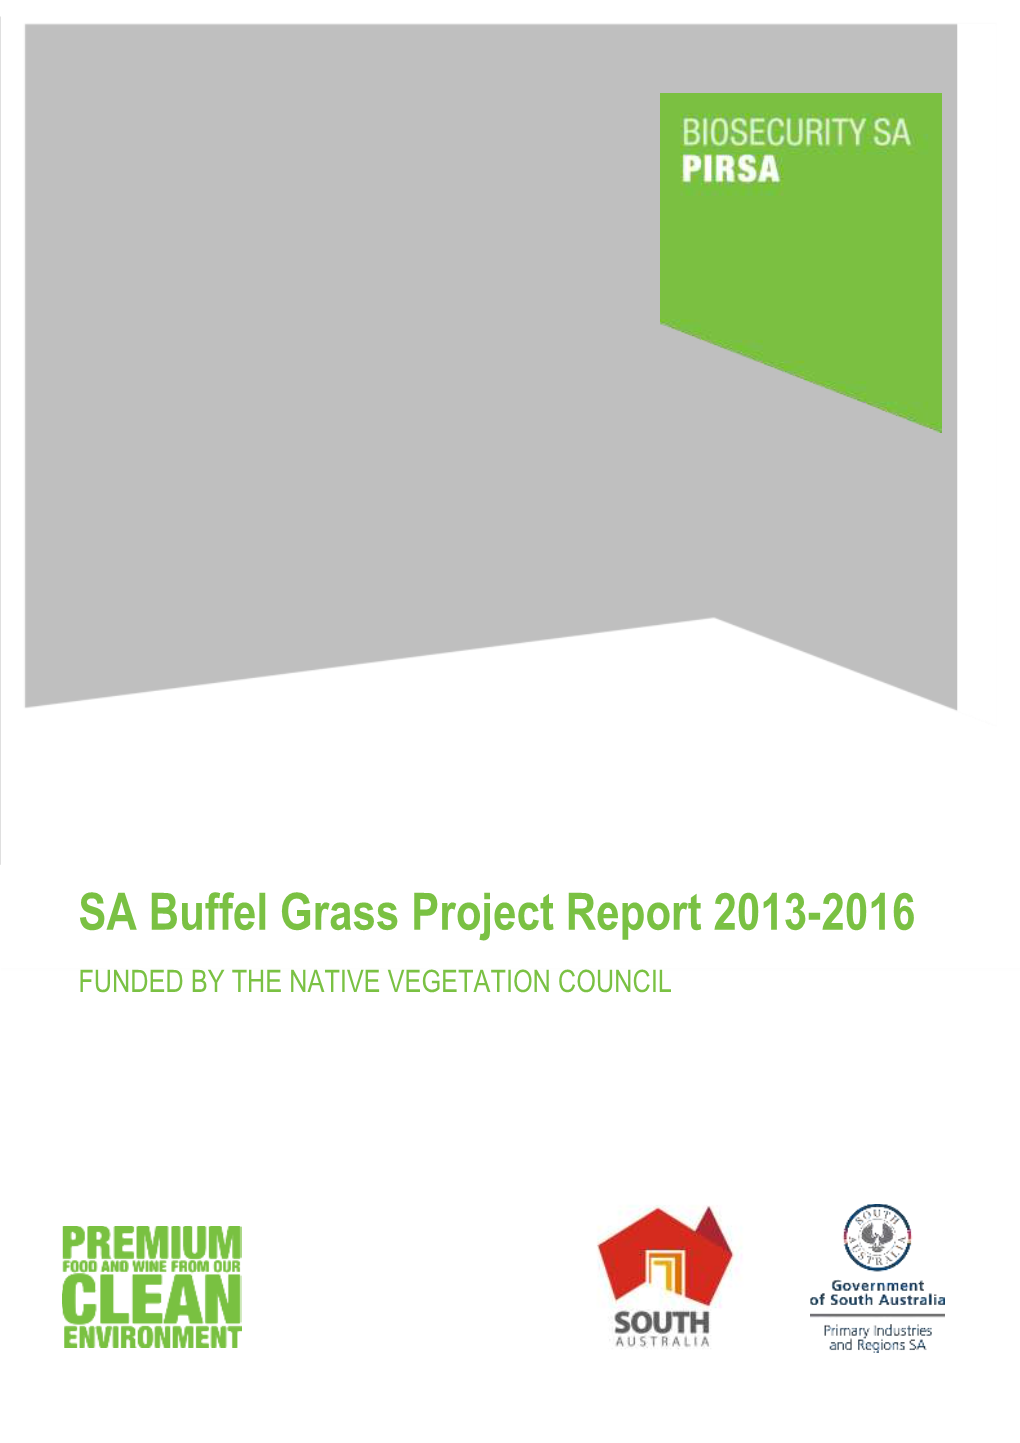 SA Buffel Grass Project Report 2013-2016 FUNDED by the NATIVE VEGETATION COUNCIL